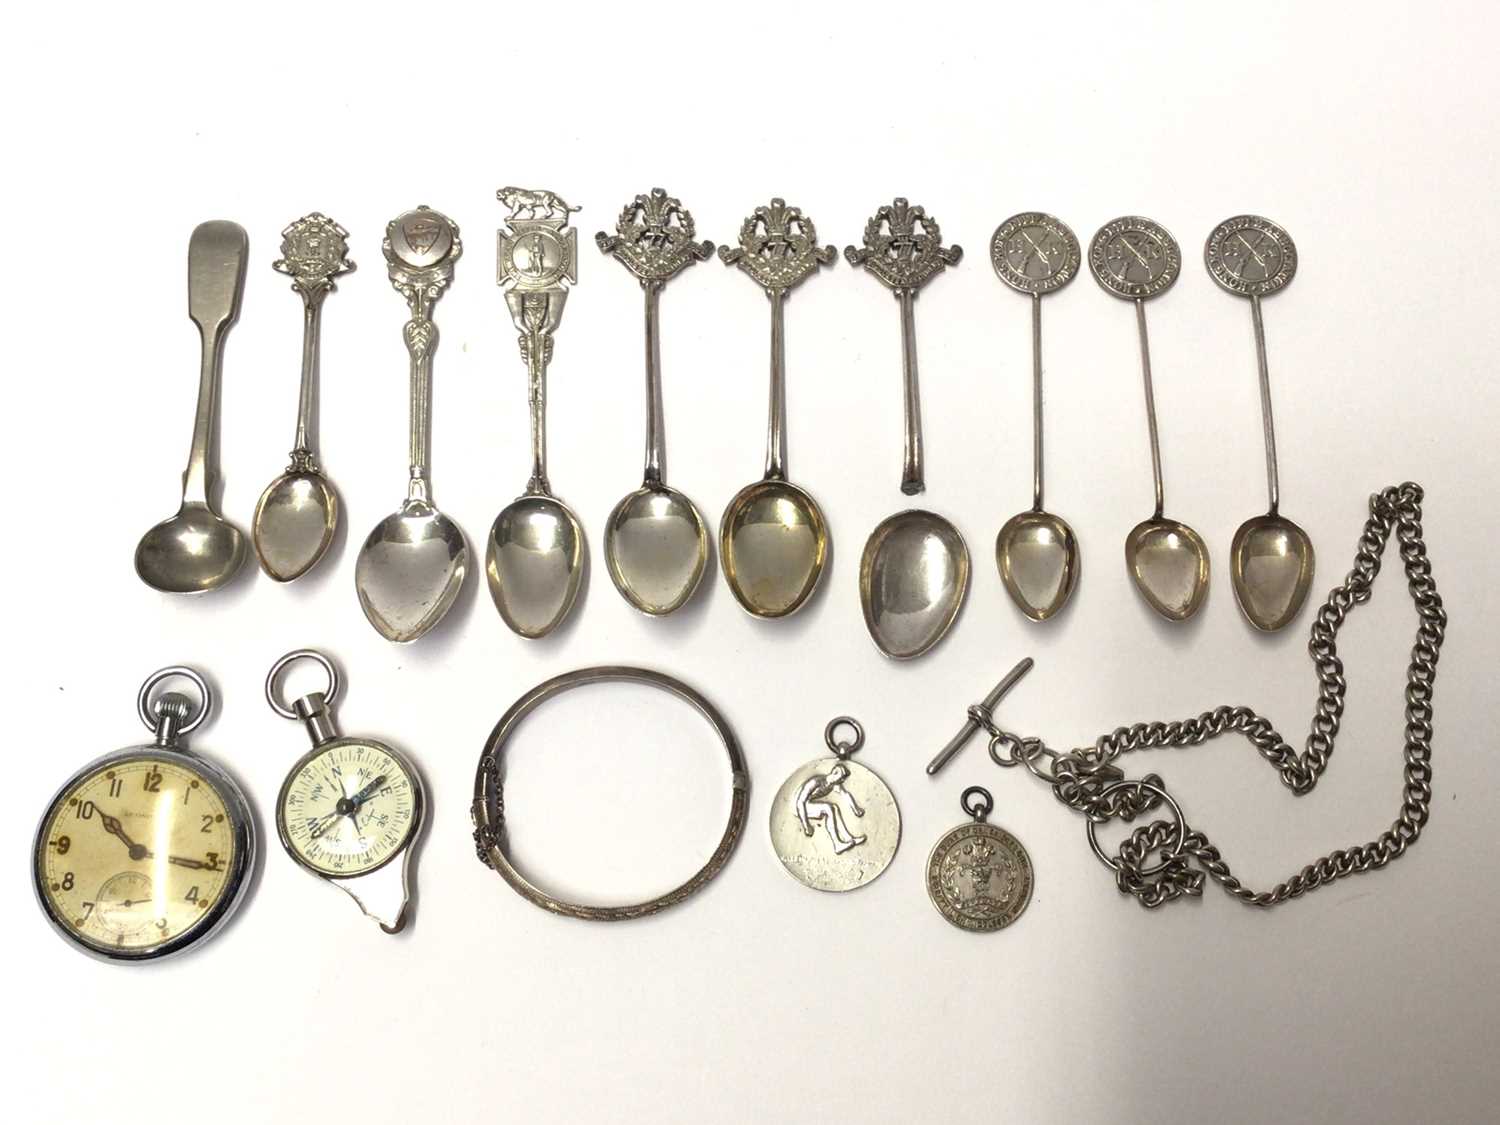 Lot 34 - Collection of silver and plated military related teaspoons, WWII pocket watch, chain, silver fobs etc